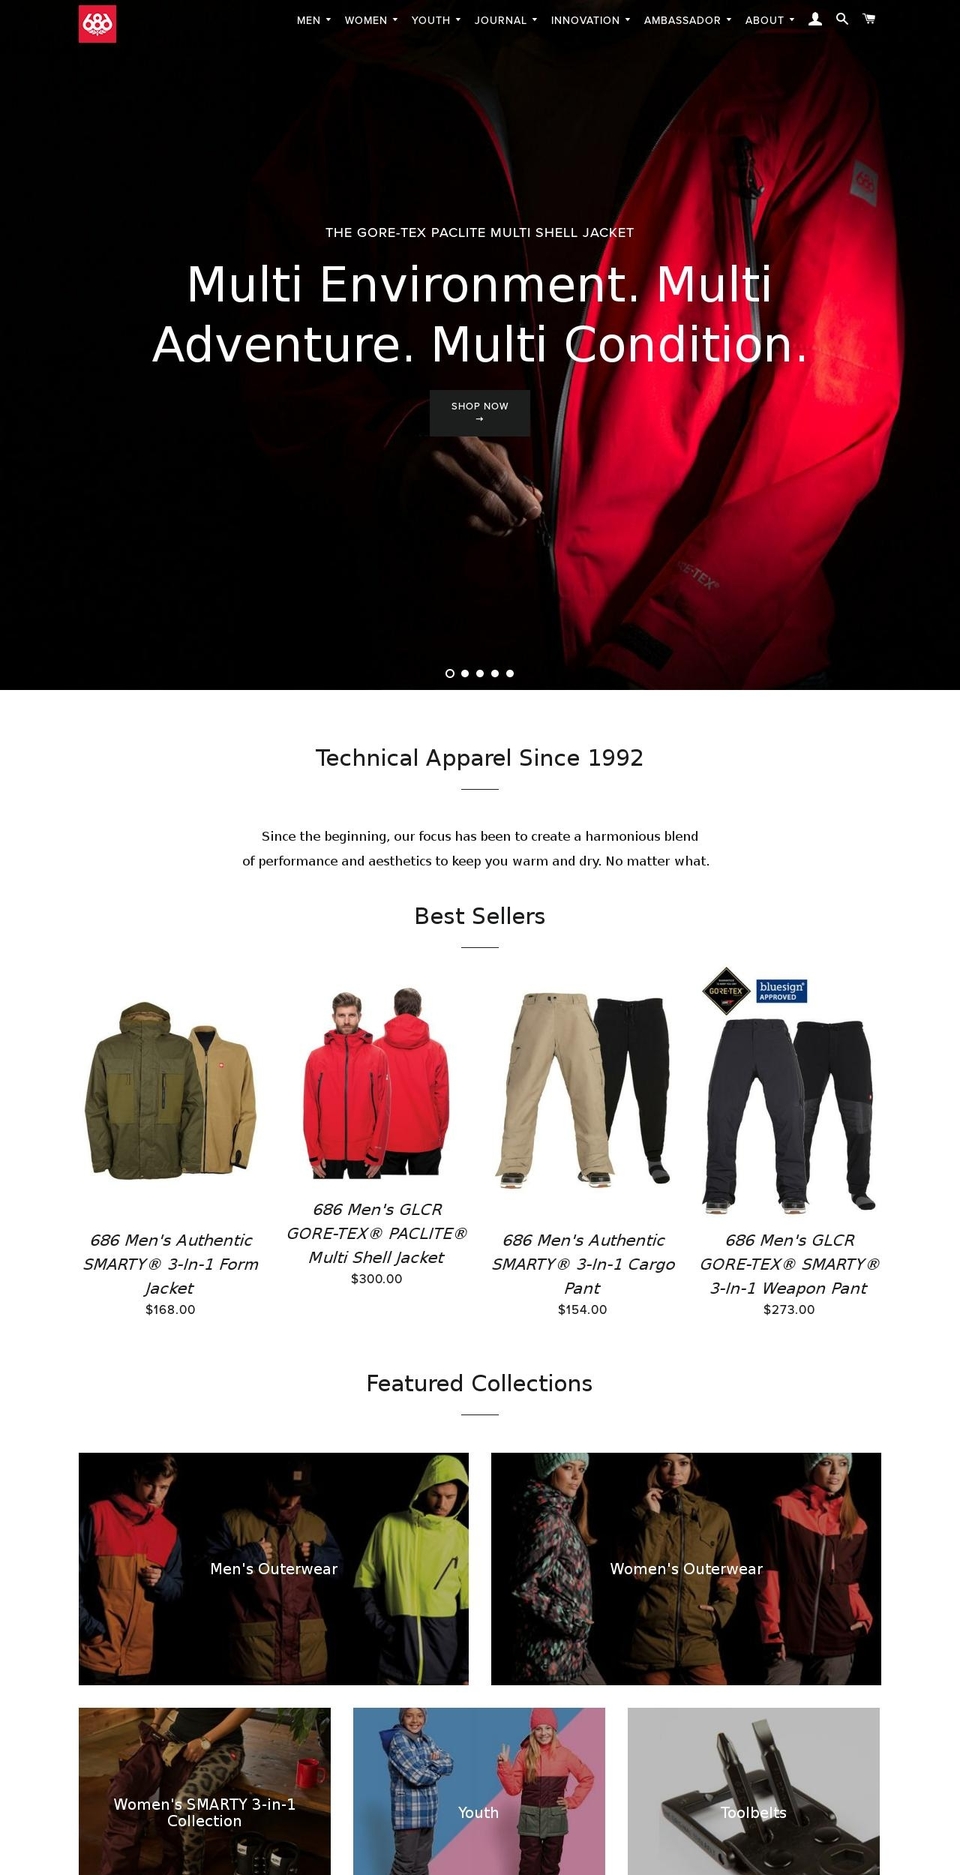 Sep  - Reclaimed Pants Shopify theme site example 686.com